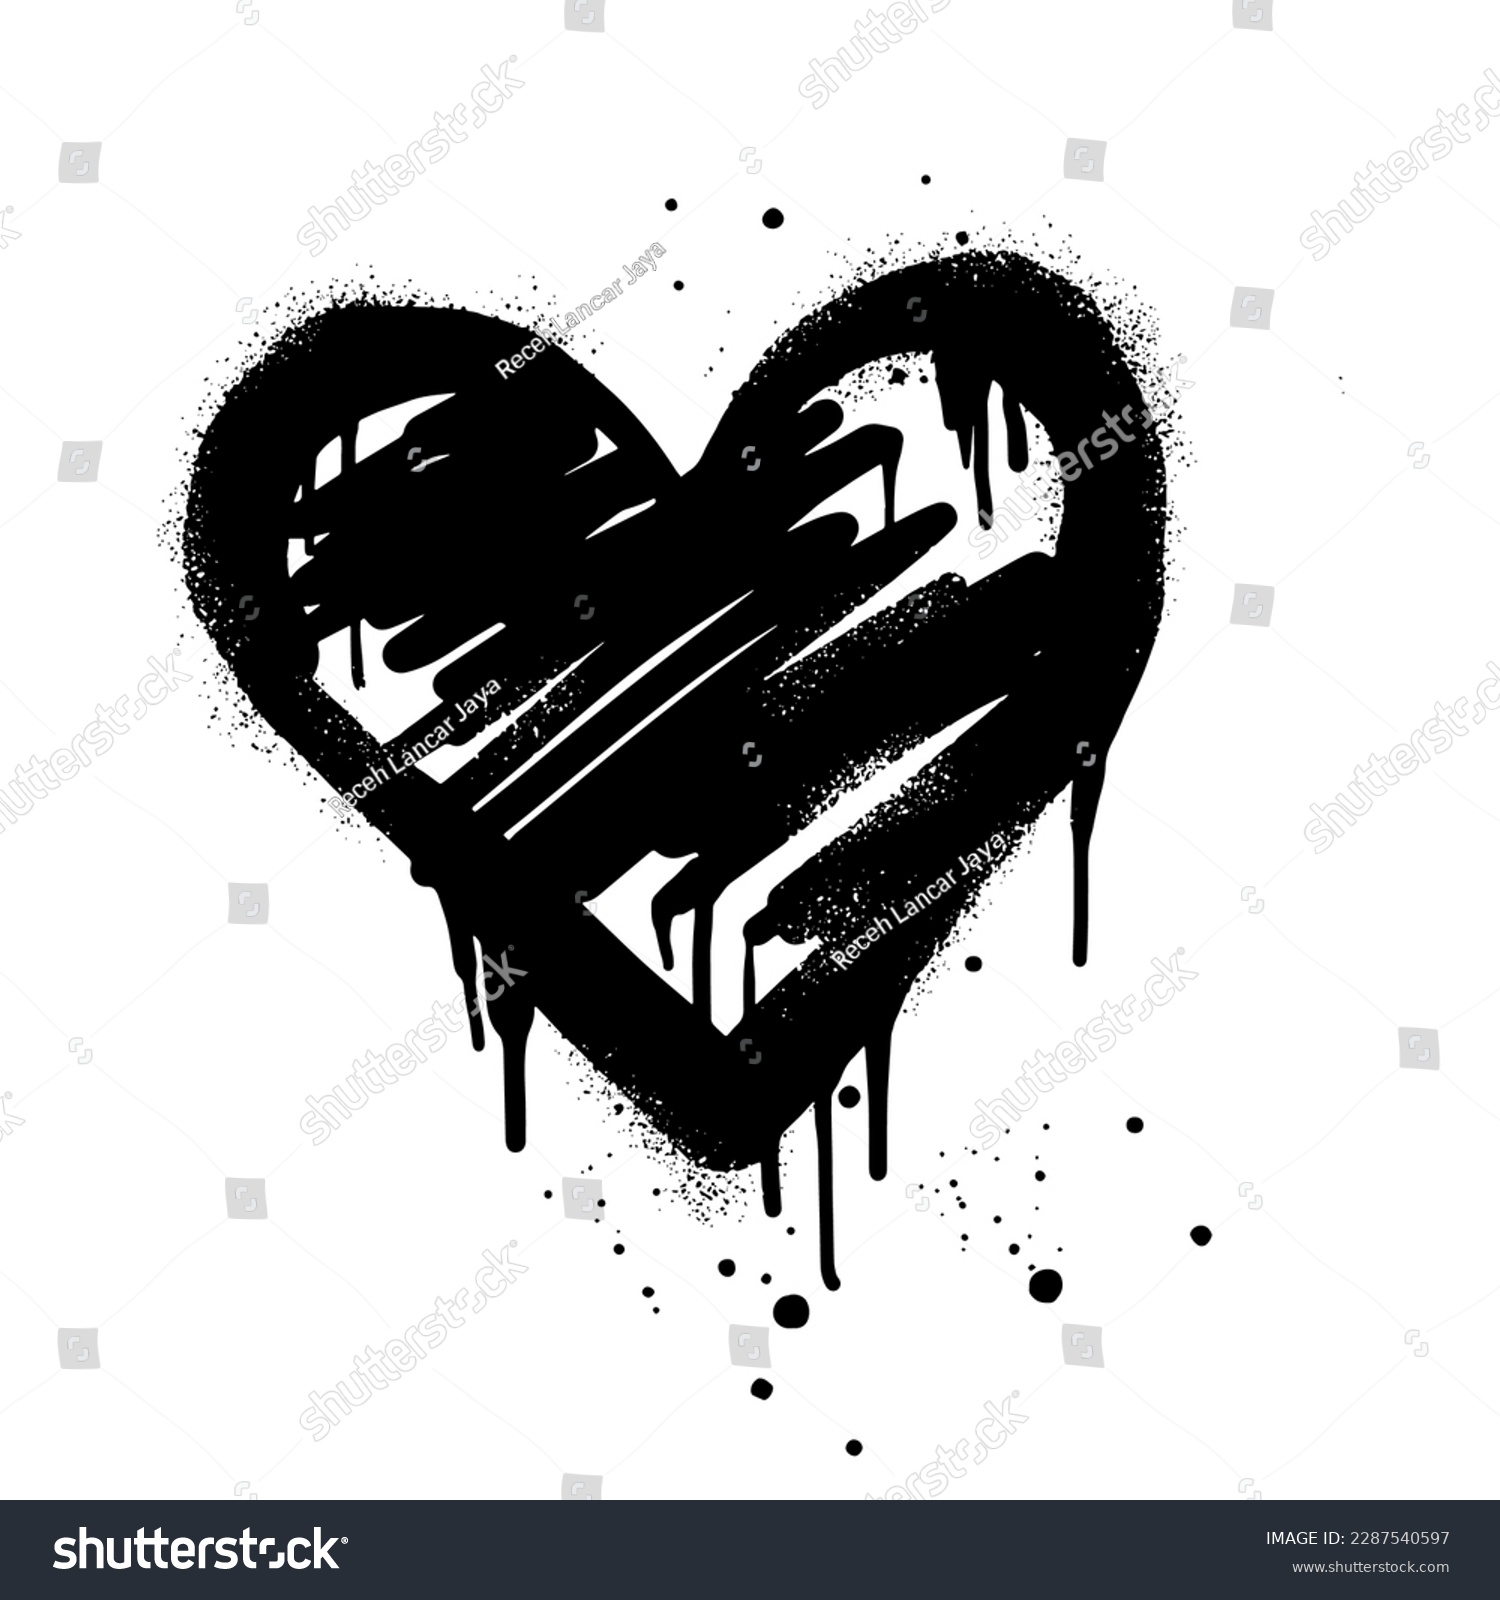 SVG of Spray painted graffiti heart sign in black over white. Love heart drip symbol. isolated on white background. vector illustration svg